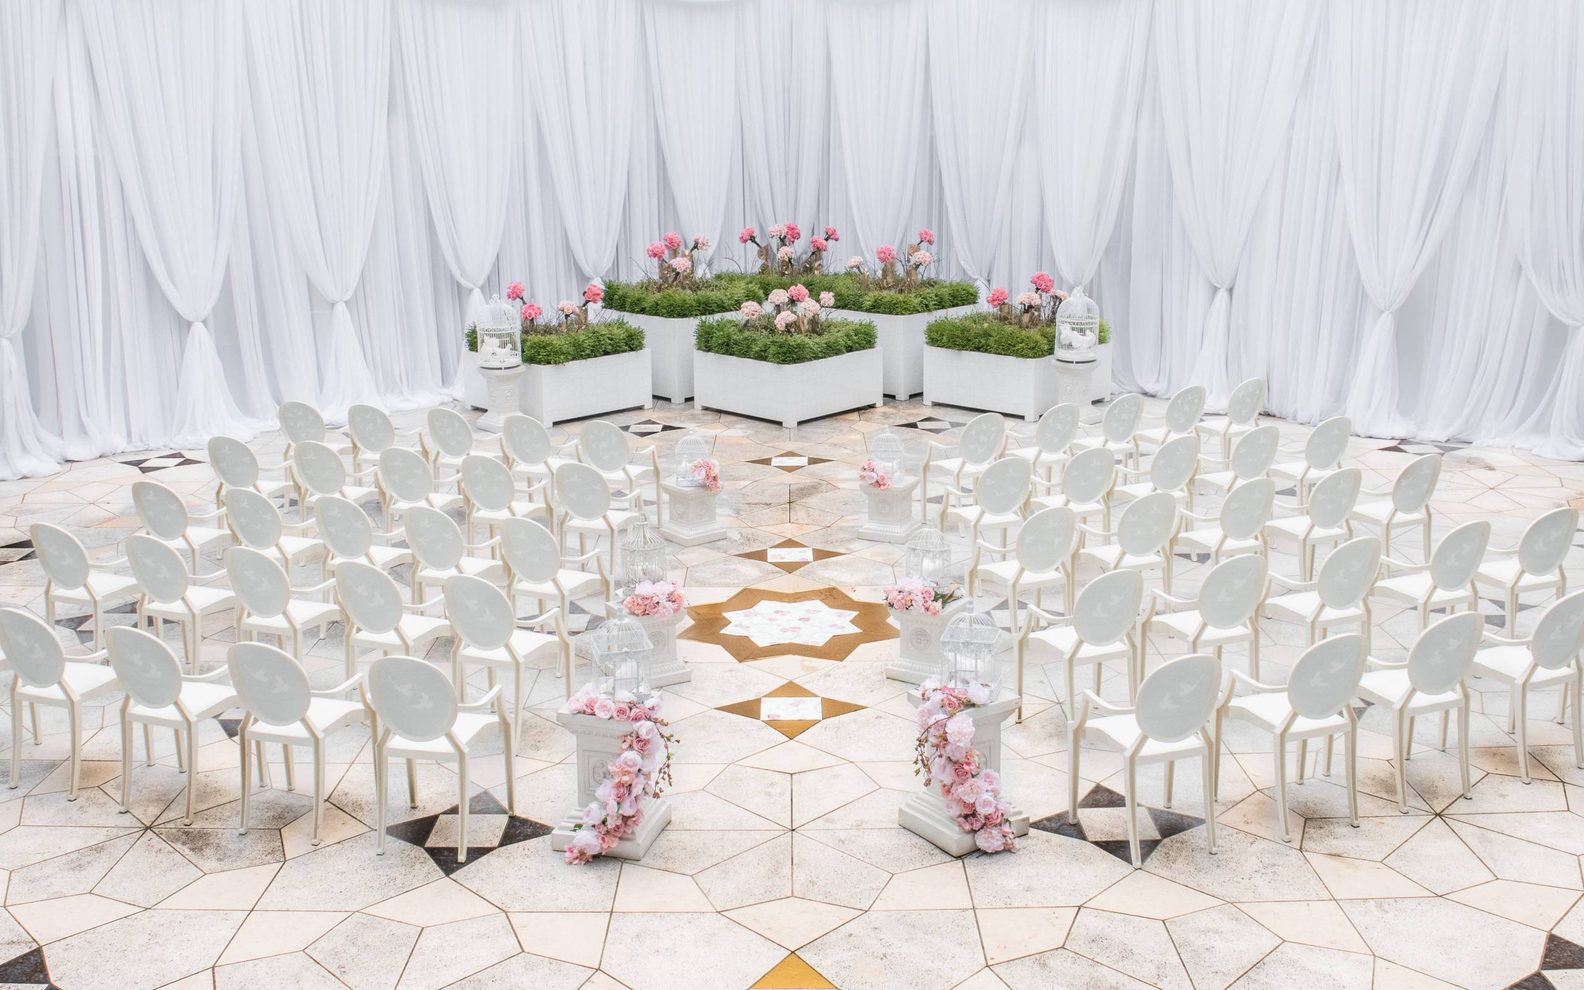 Wedding ceremony set up with white chairs on a decorative tile floor at the Aga Khan Museum